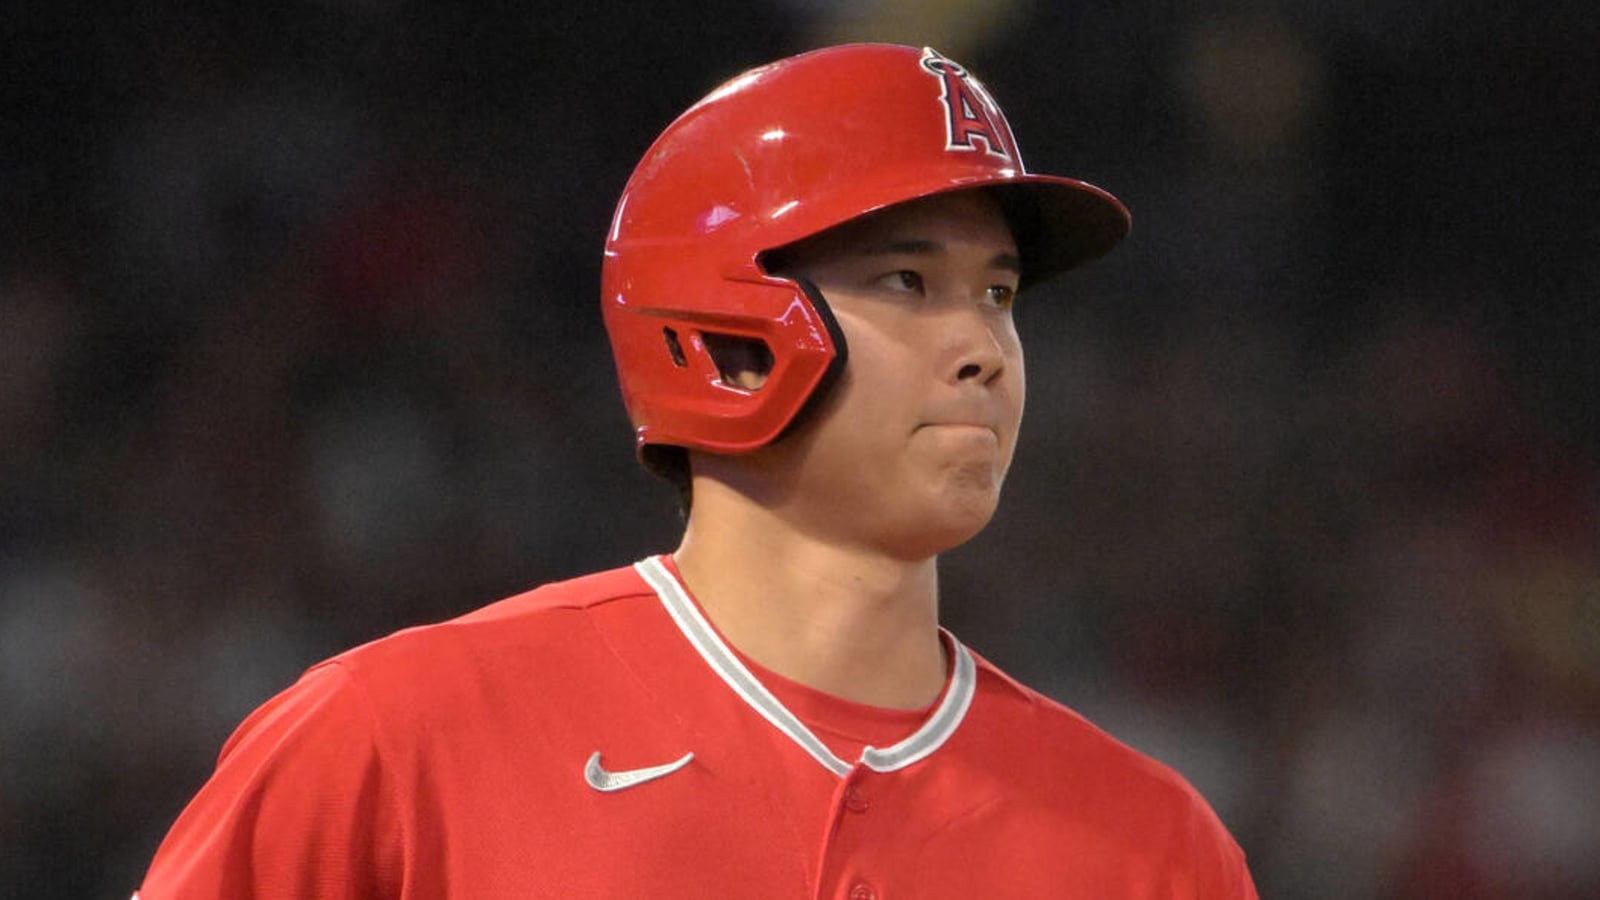 Insider reveals team that will not trade for Ohtani